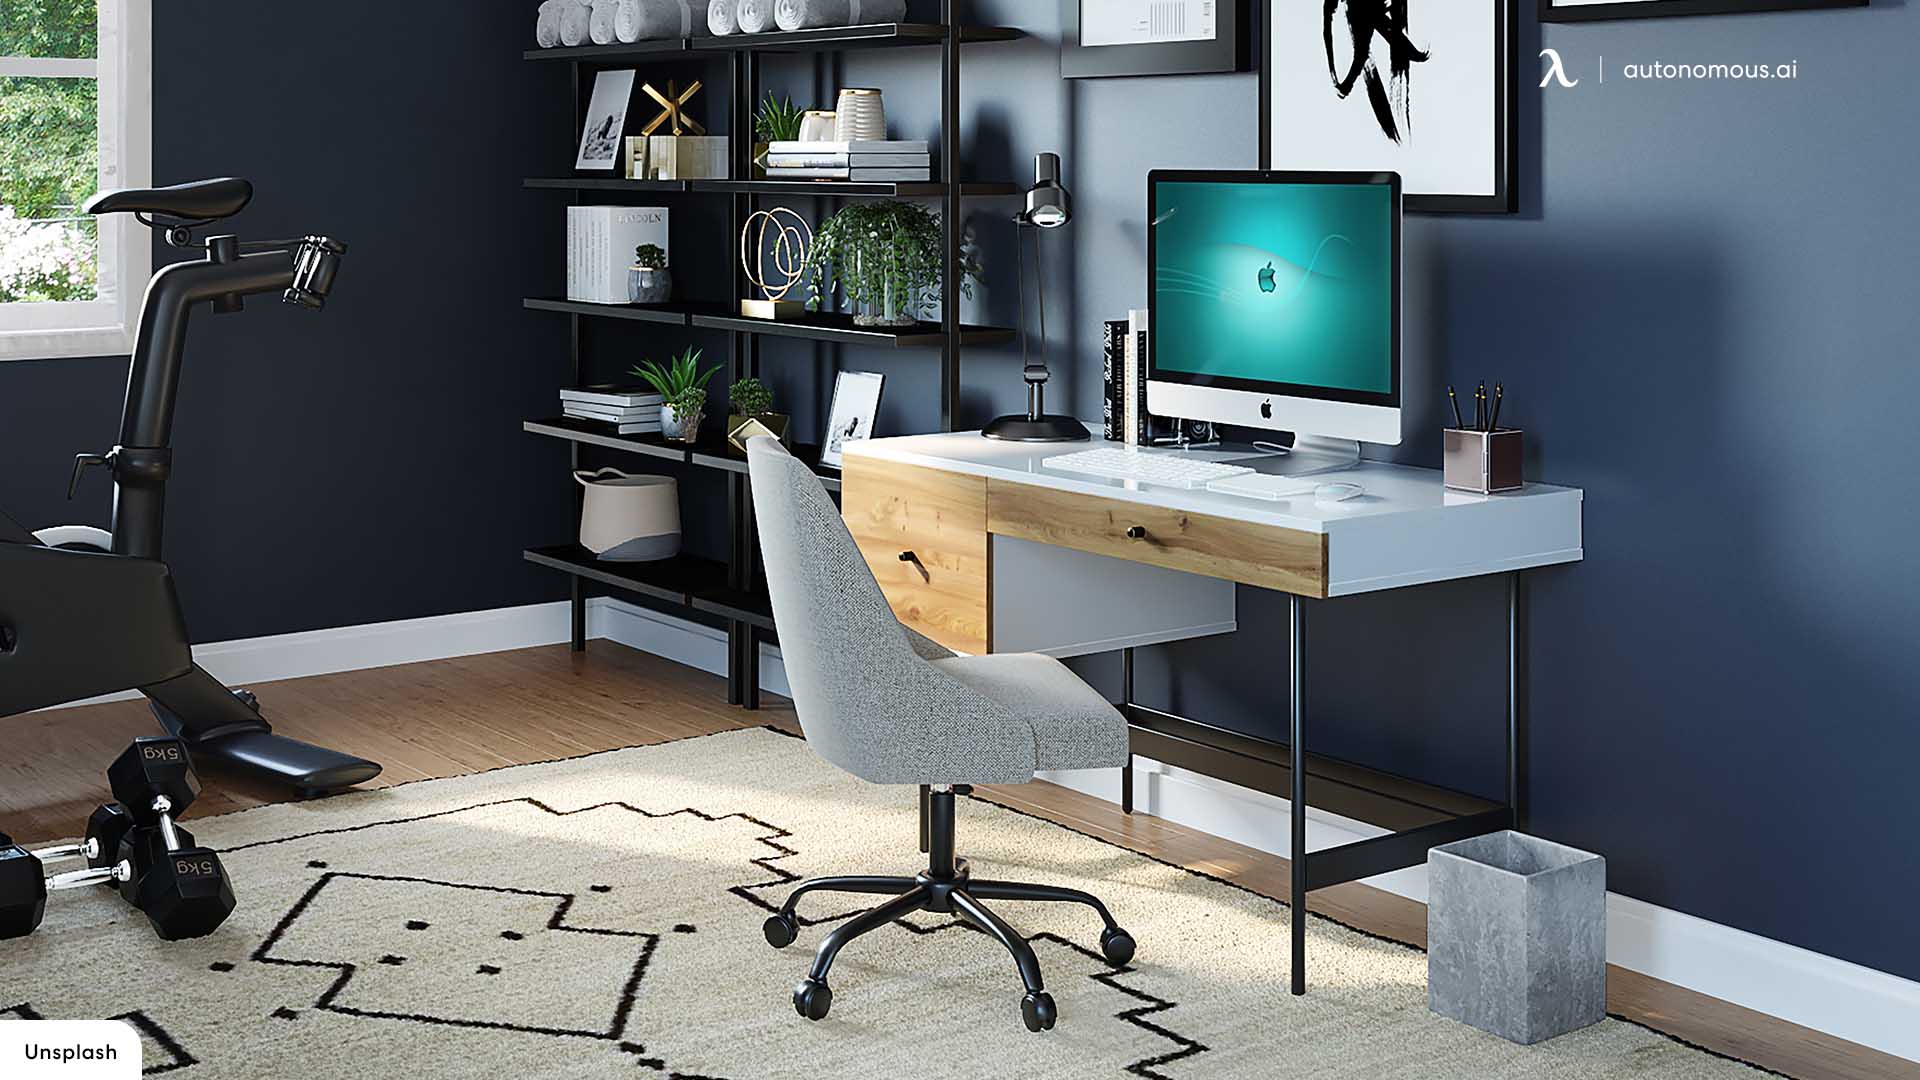 Refreshing your home office look